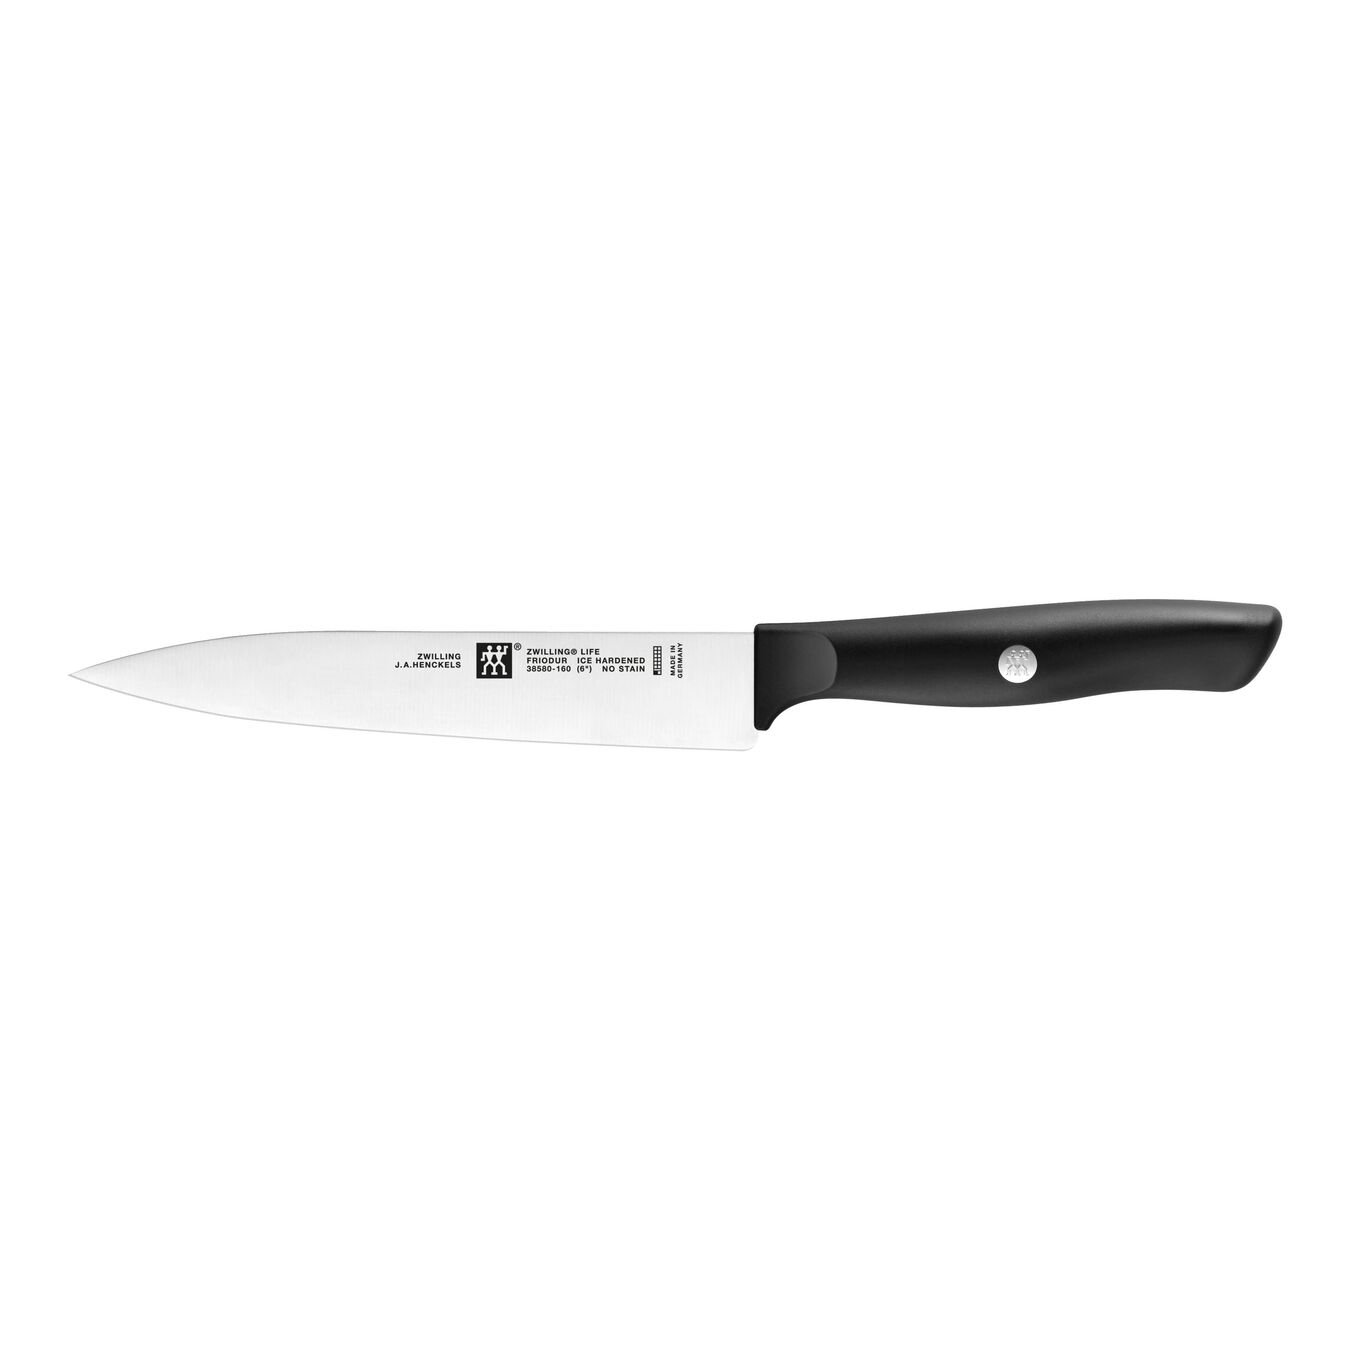 6.5-inch, Carving knife - Visual Imperfections,,large 1